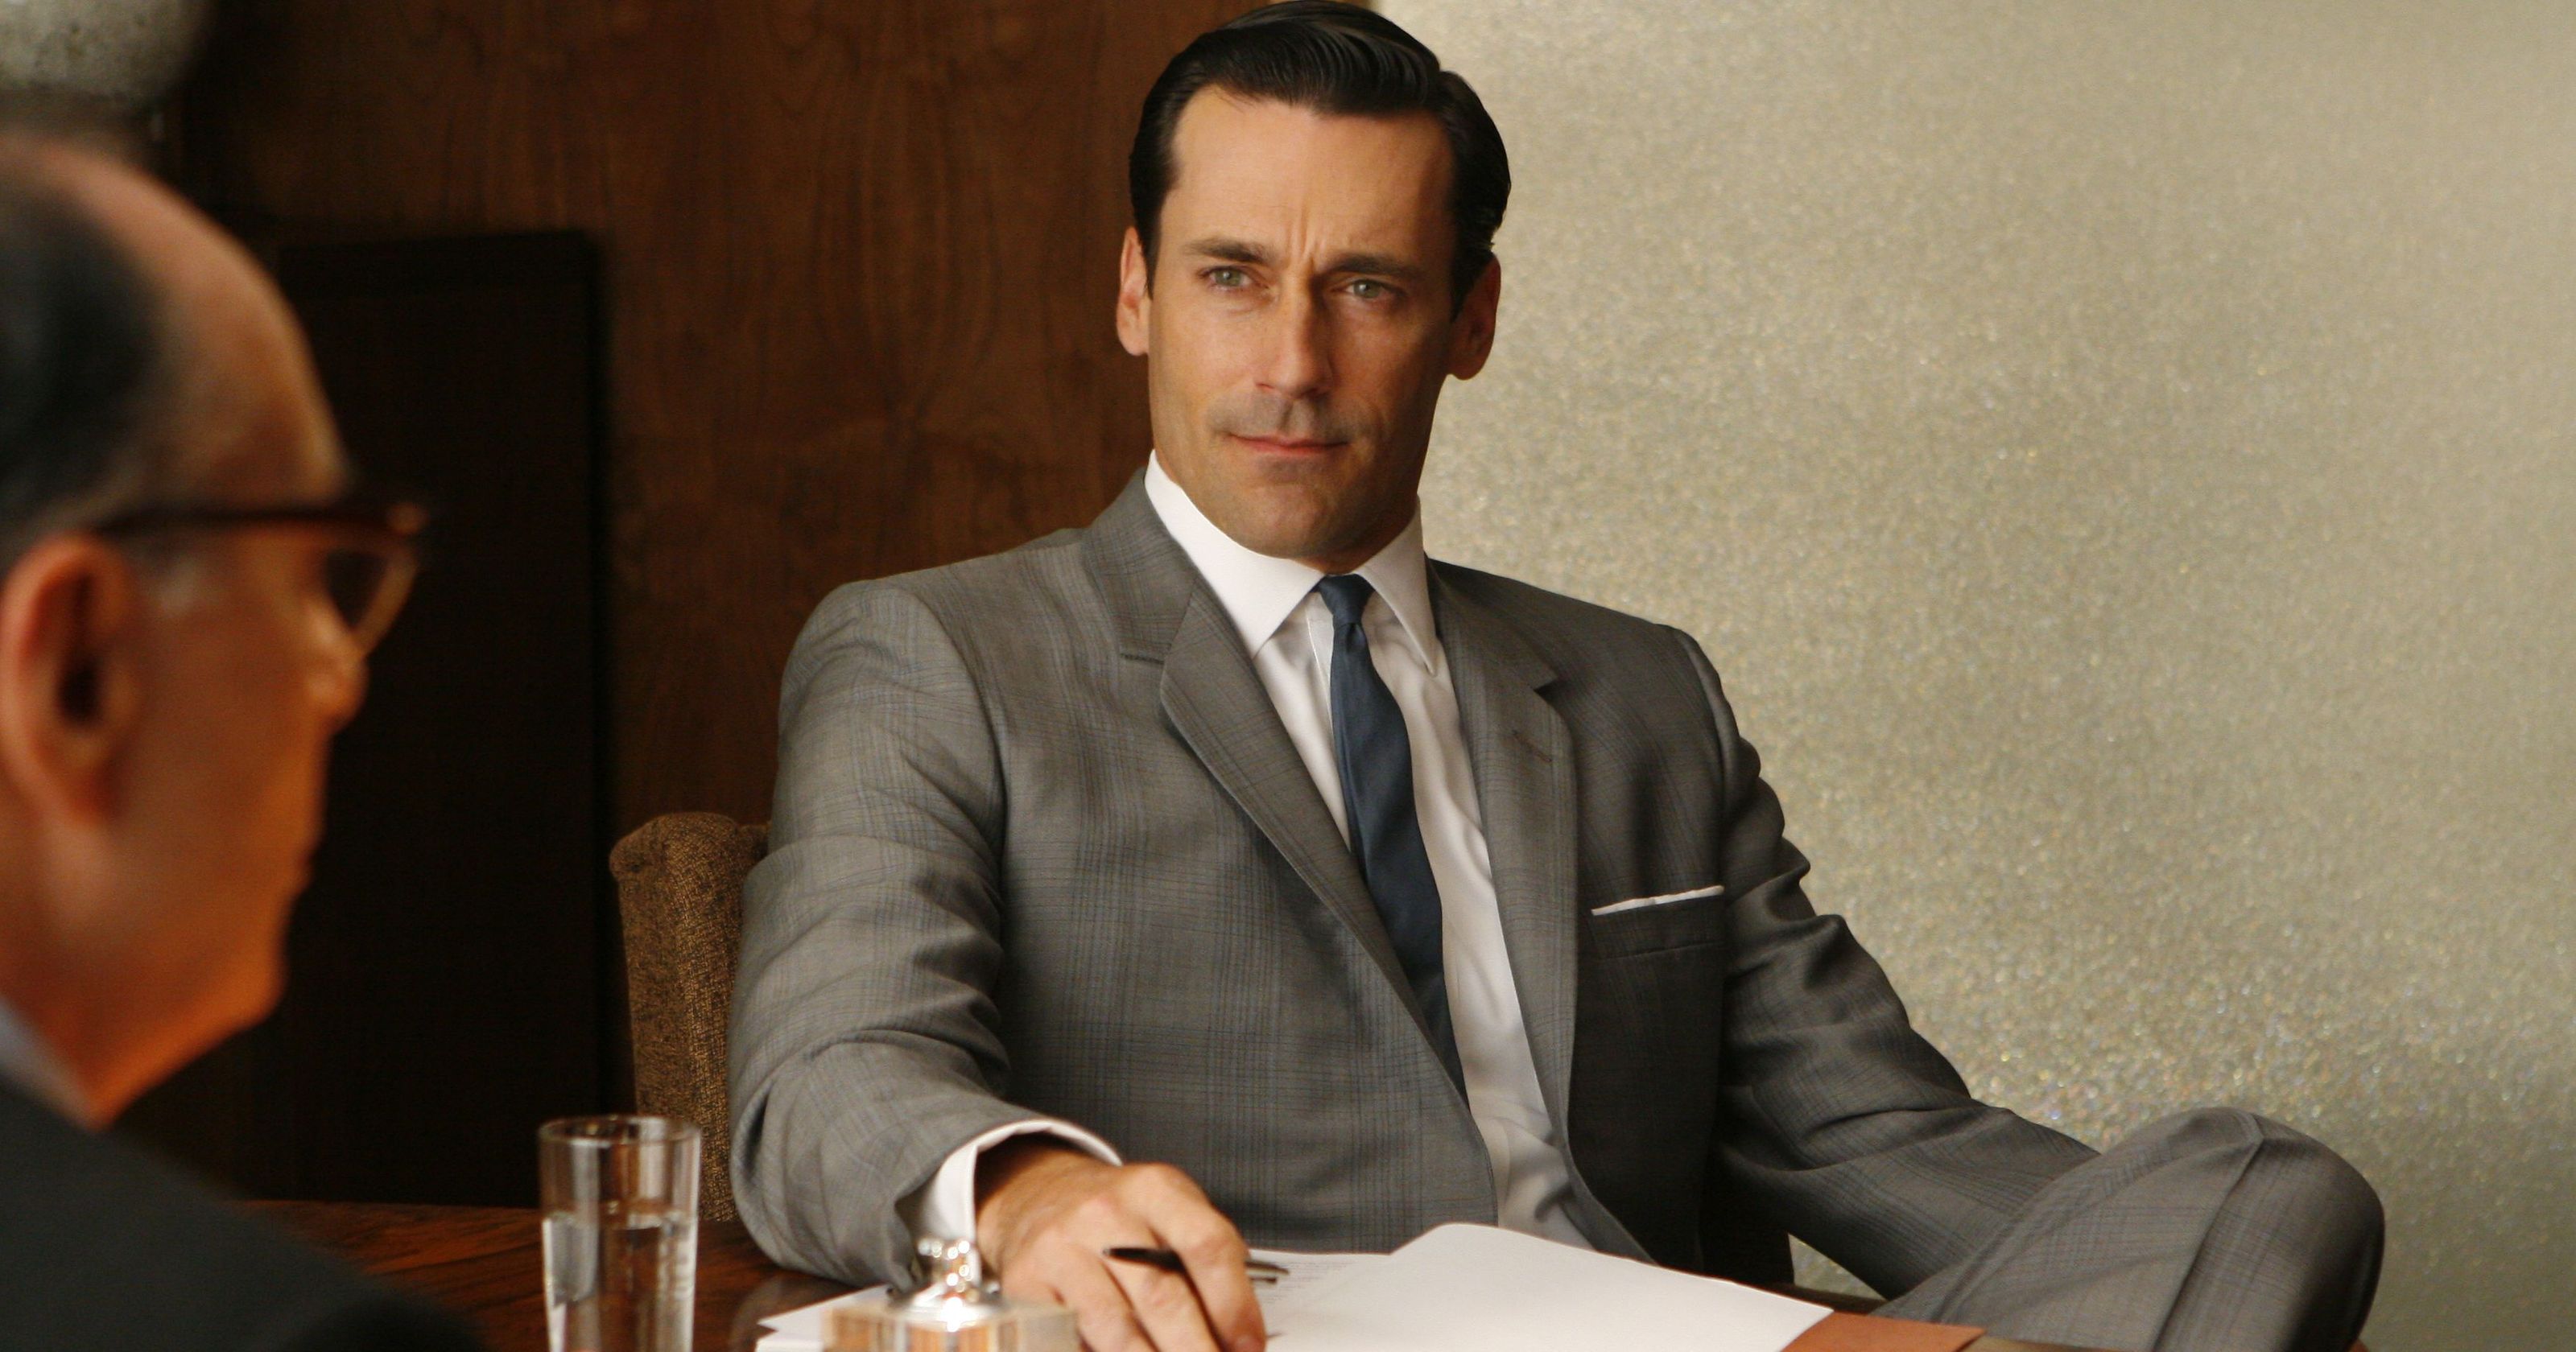 Mad Men Characters Sorted Into Their Hogwarts Houses